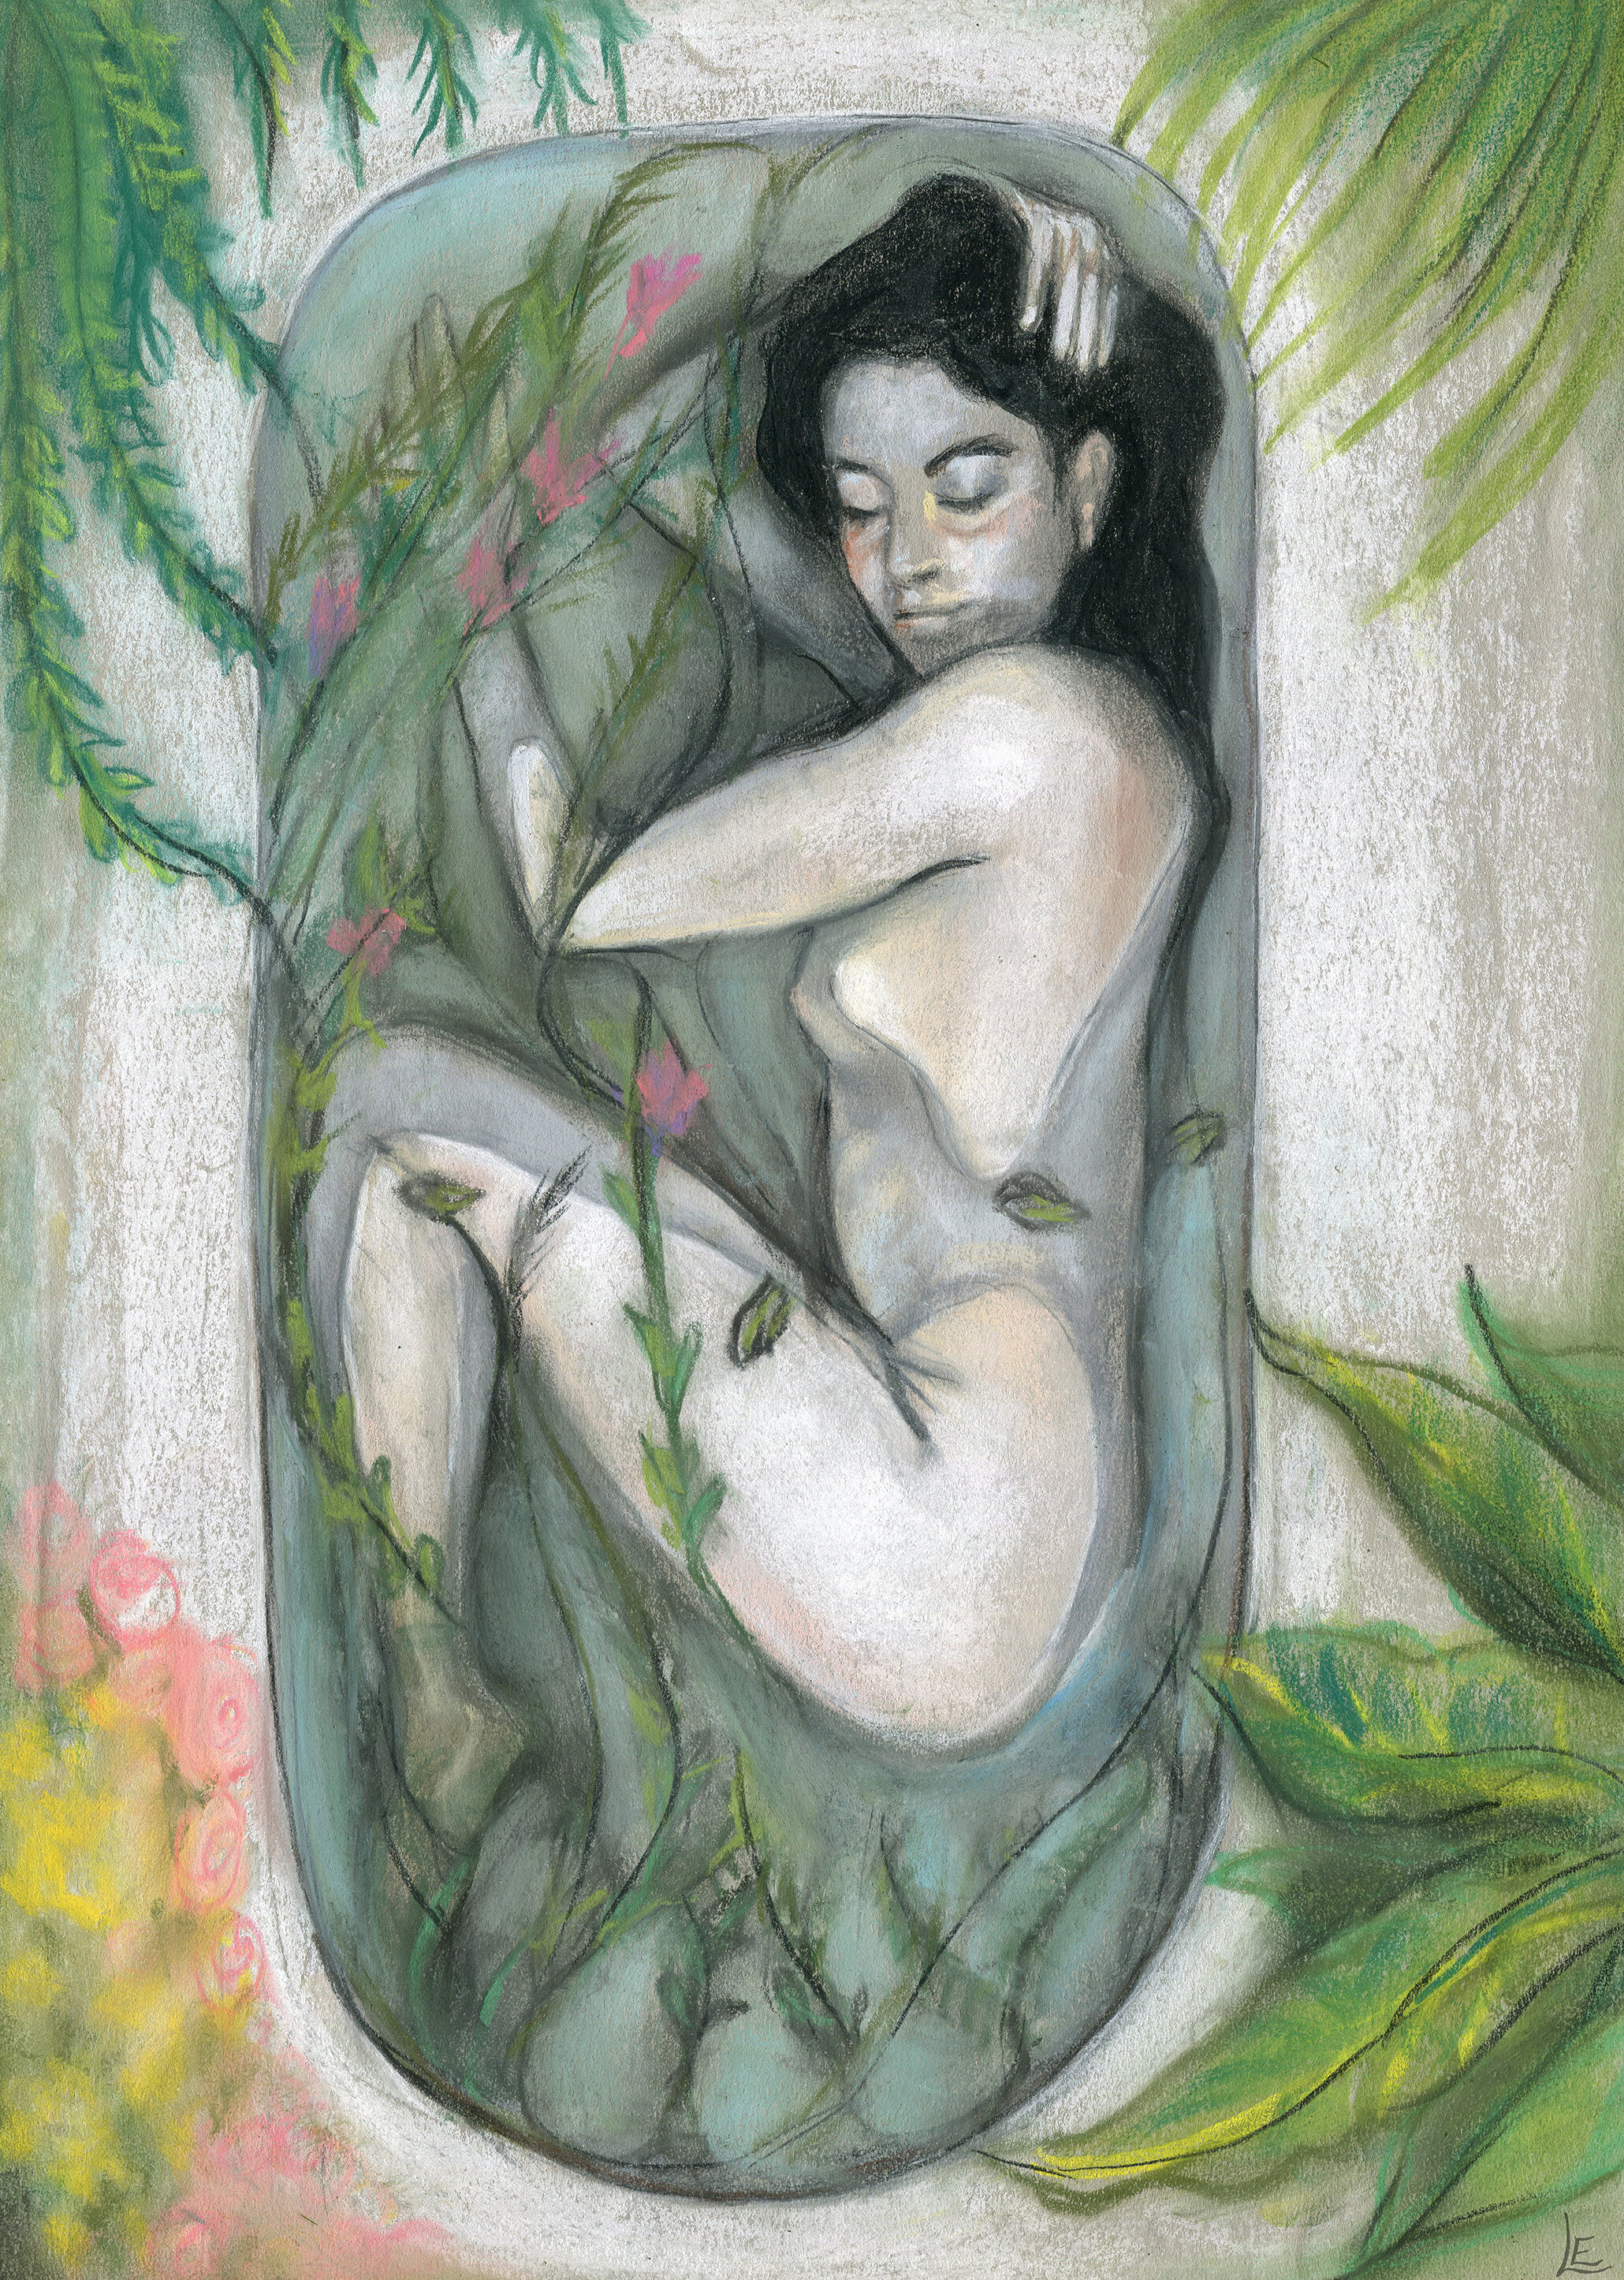 Daintree Dreaming in the Bath VI (Inspired by Ophelia)